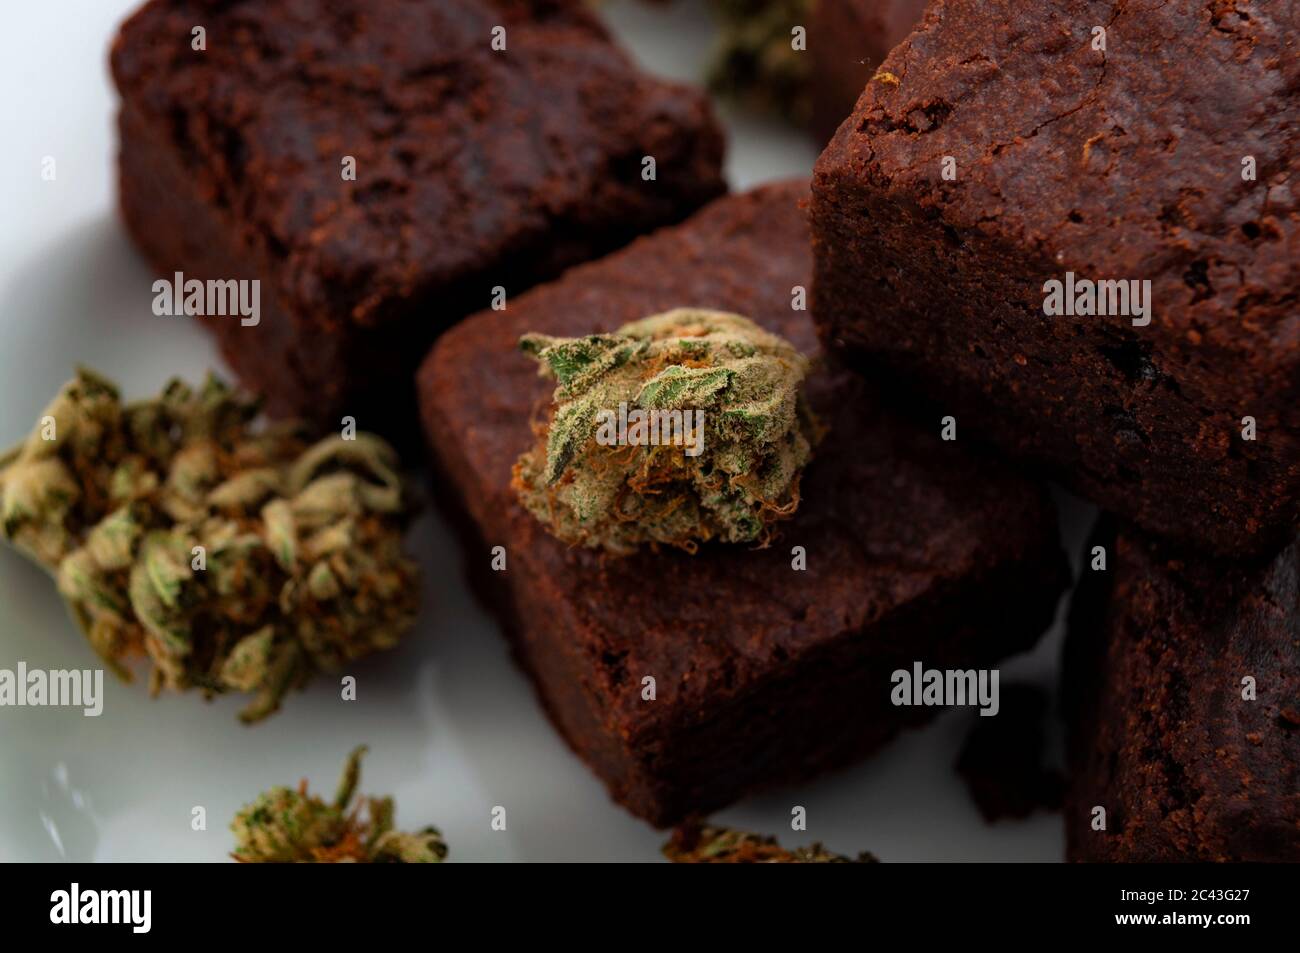 Edible marijuana for chronic pain treatment, alternative medicine diet and legal weed concept theme with close up on cannabis buds and delicious brown Stock Photo